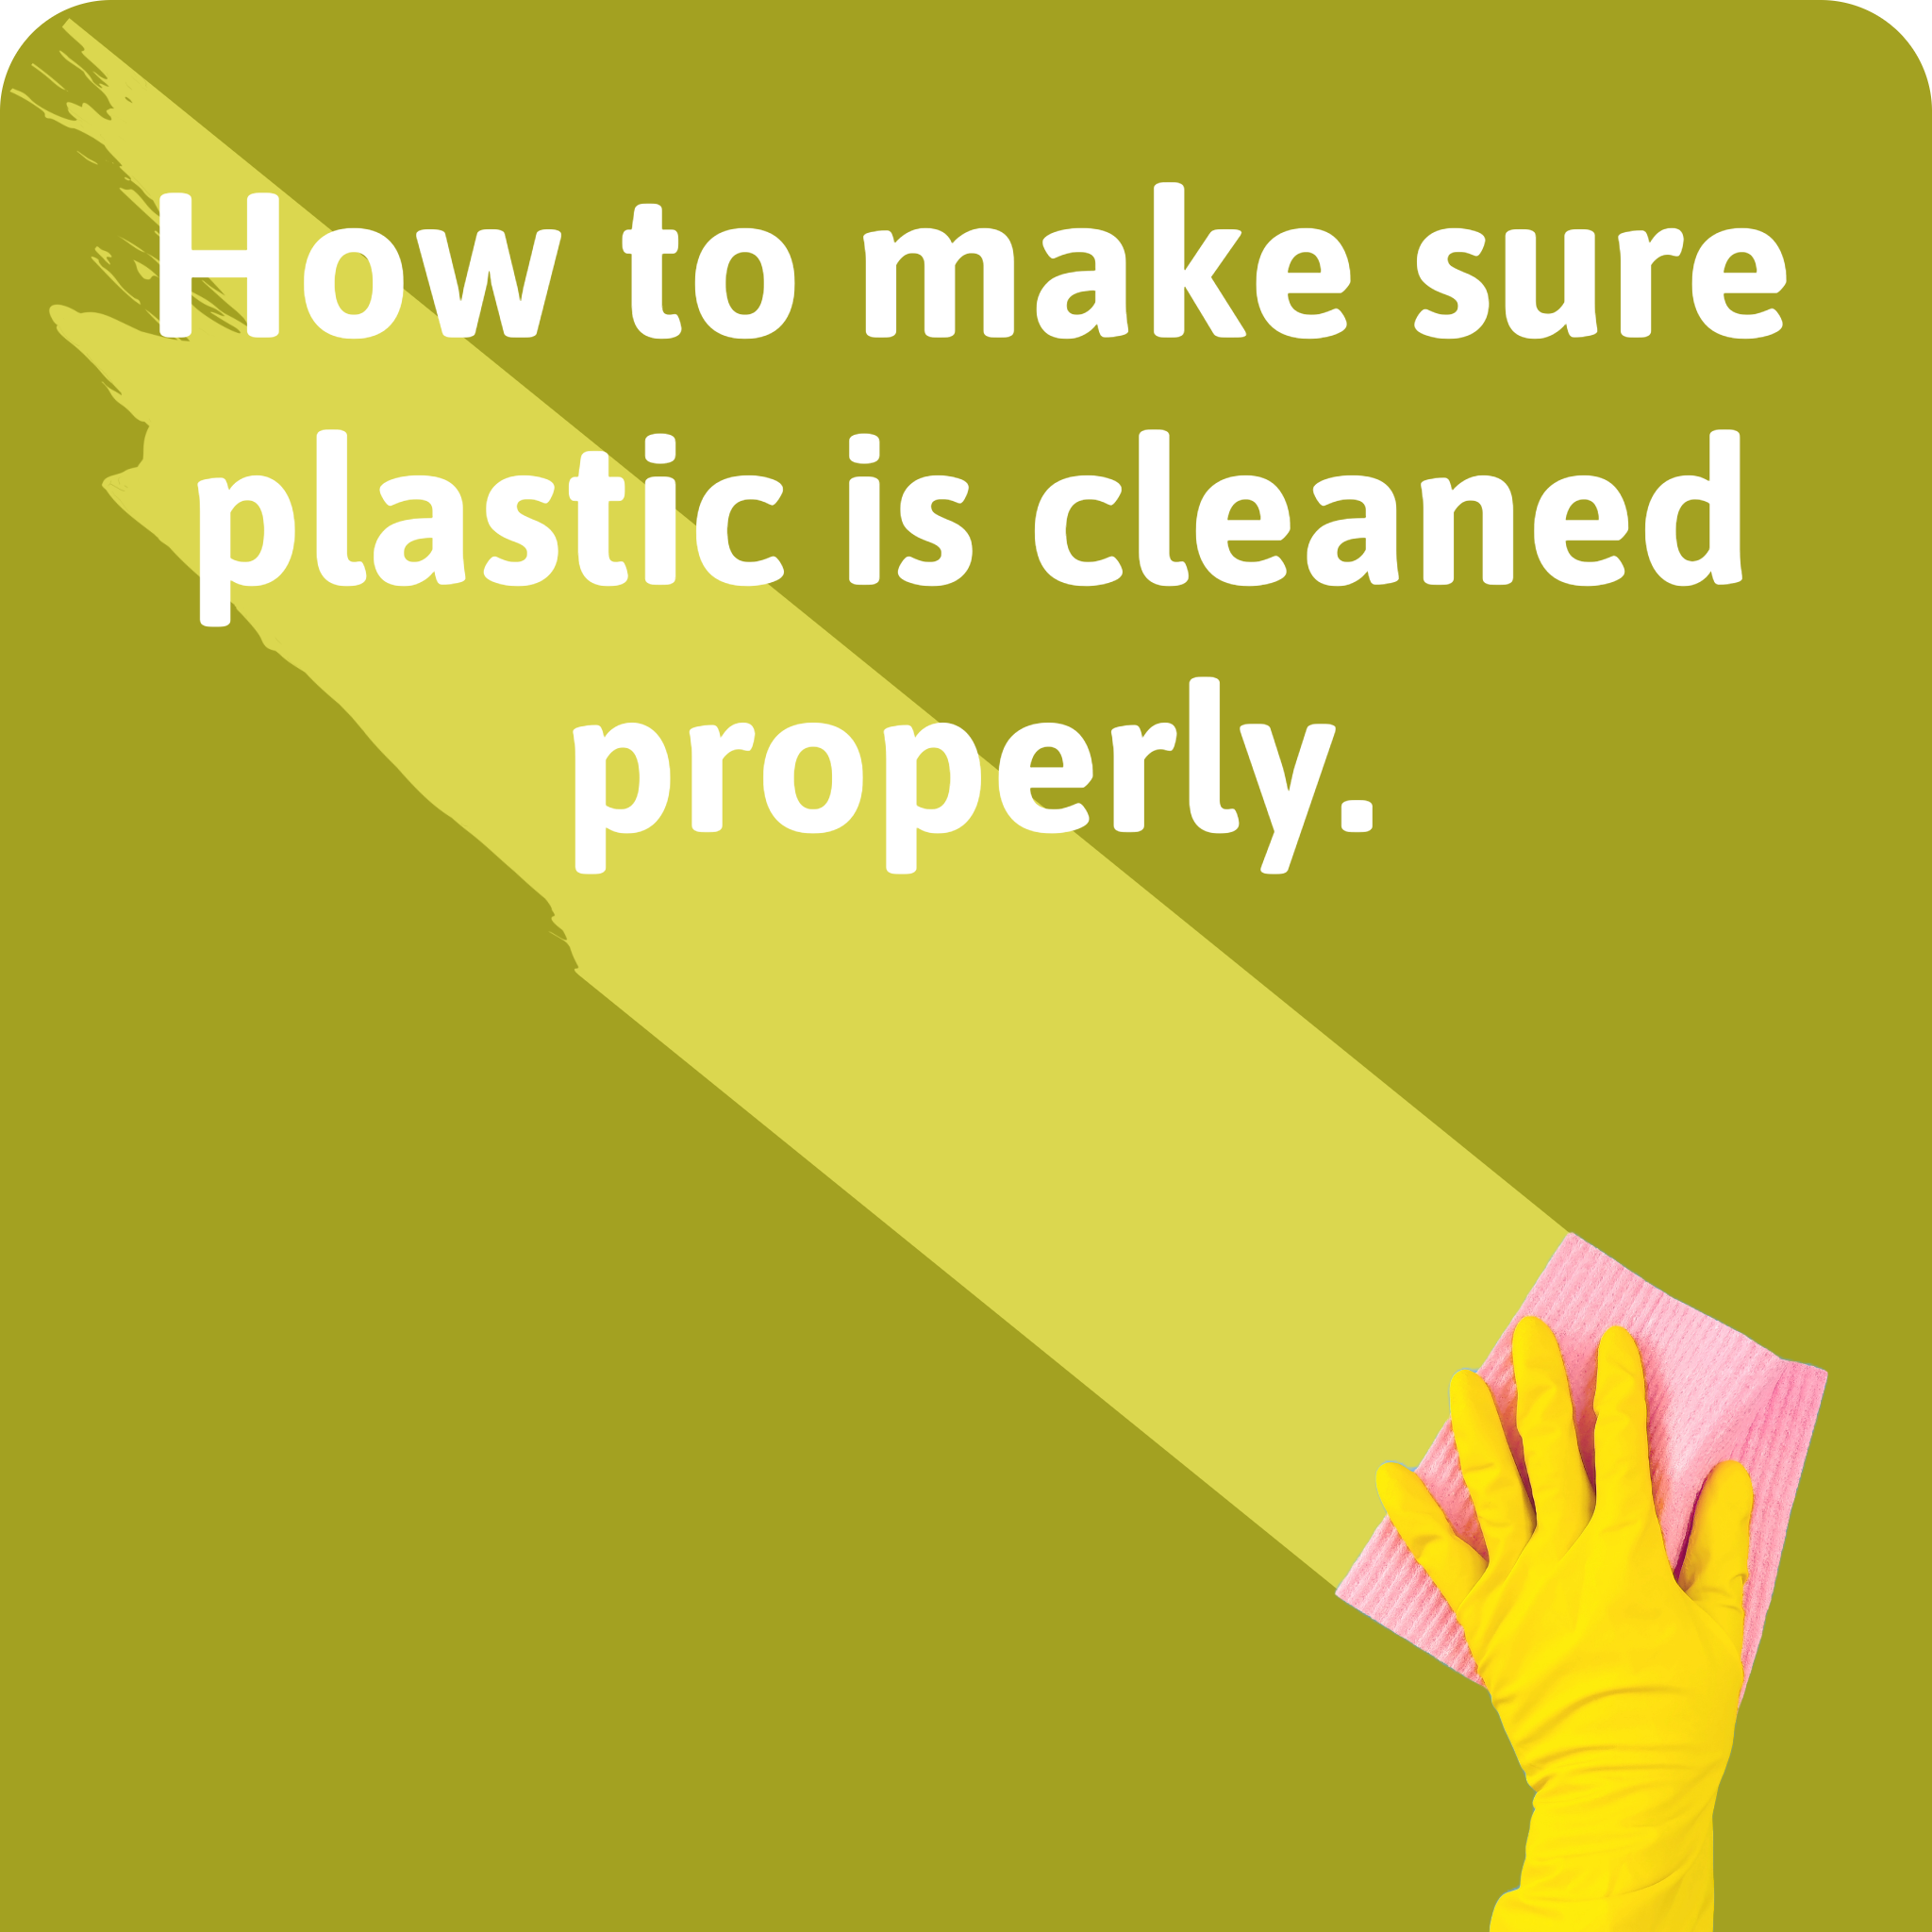 How to make sure plastic is cleaned properly is the text on this image. White text over a yellow background with a hand wiping accross the image holding a sponge.